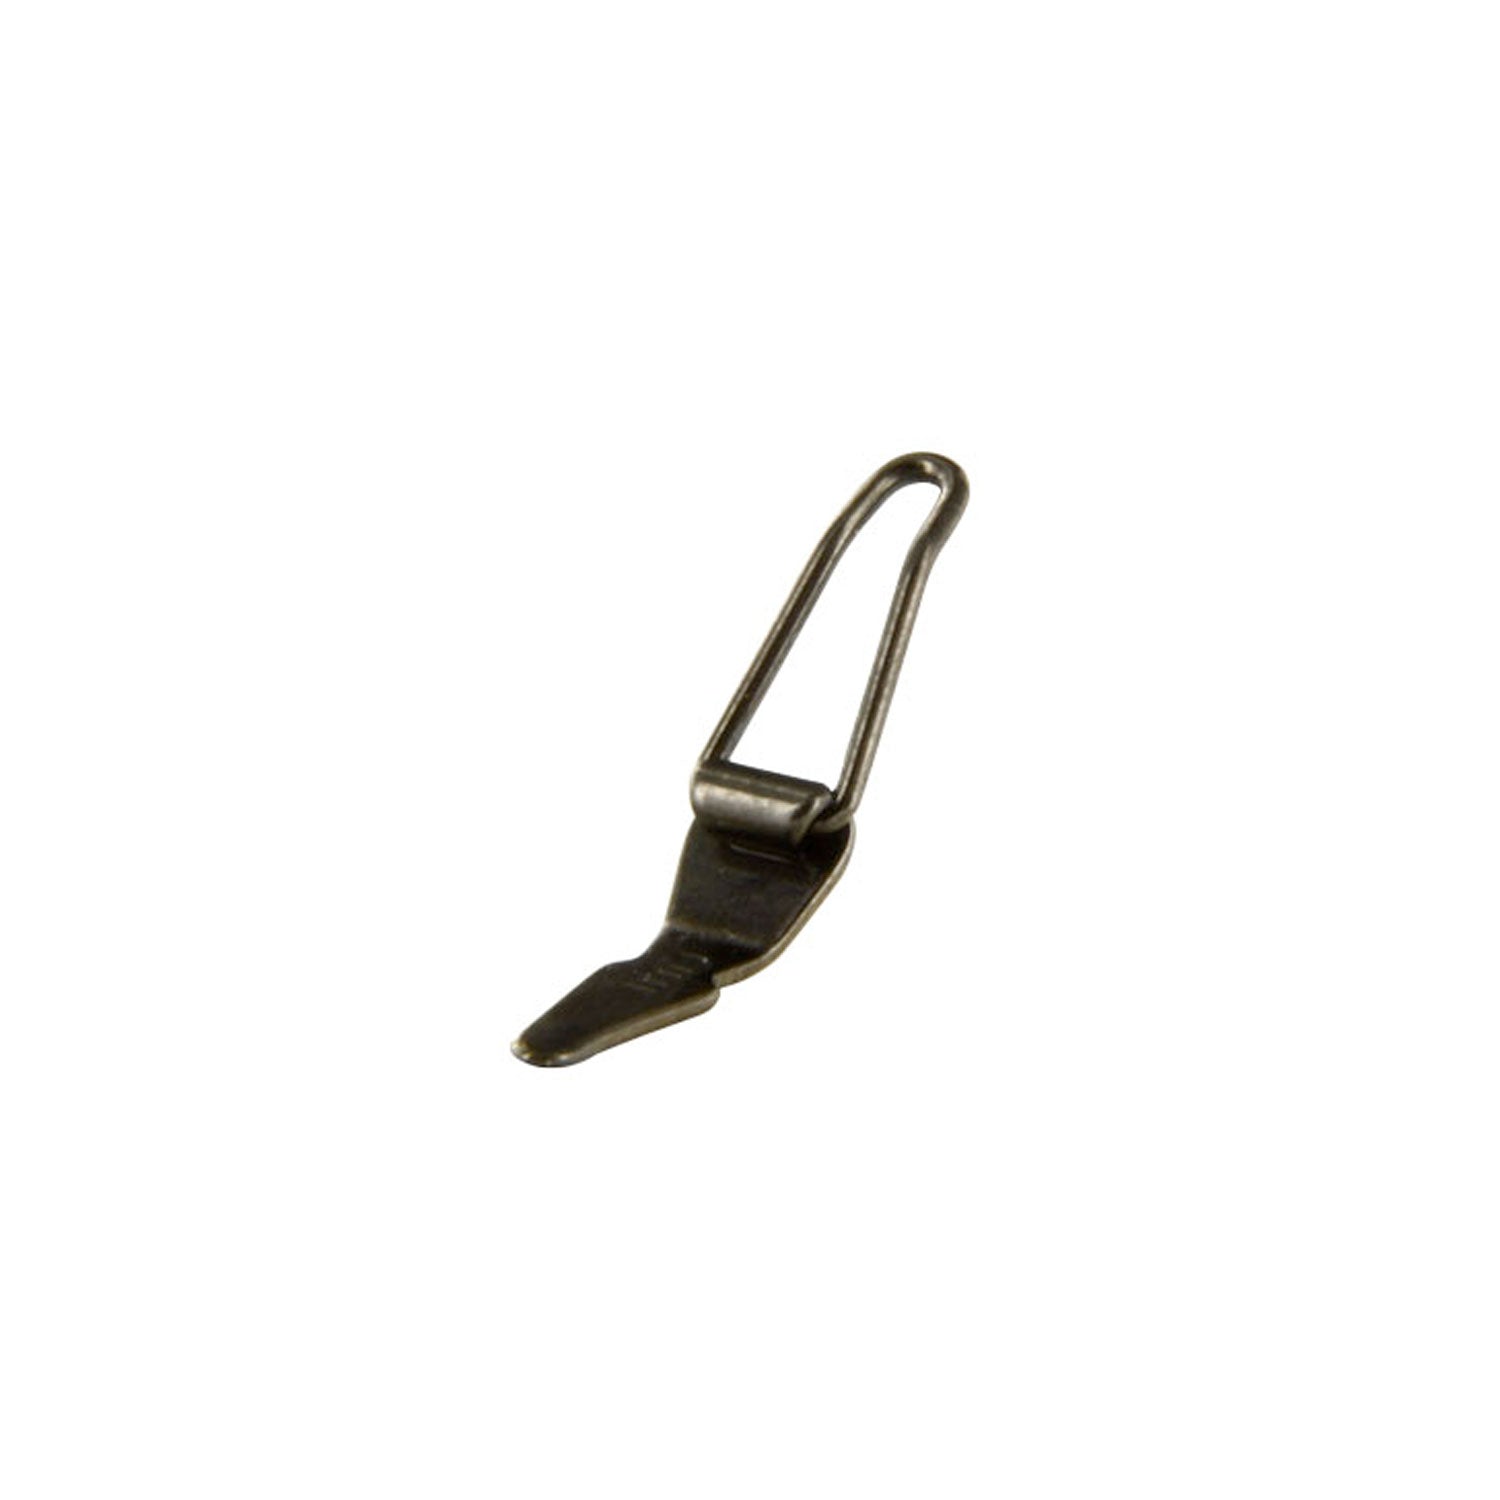 Hook Keepers for Rod Building - Free Shipping